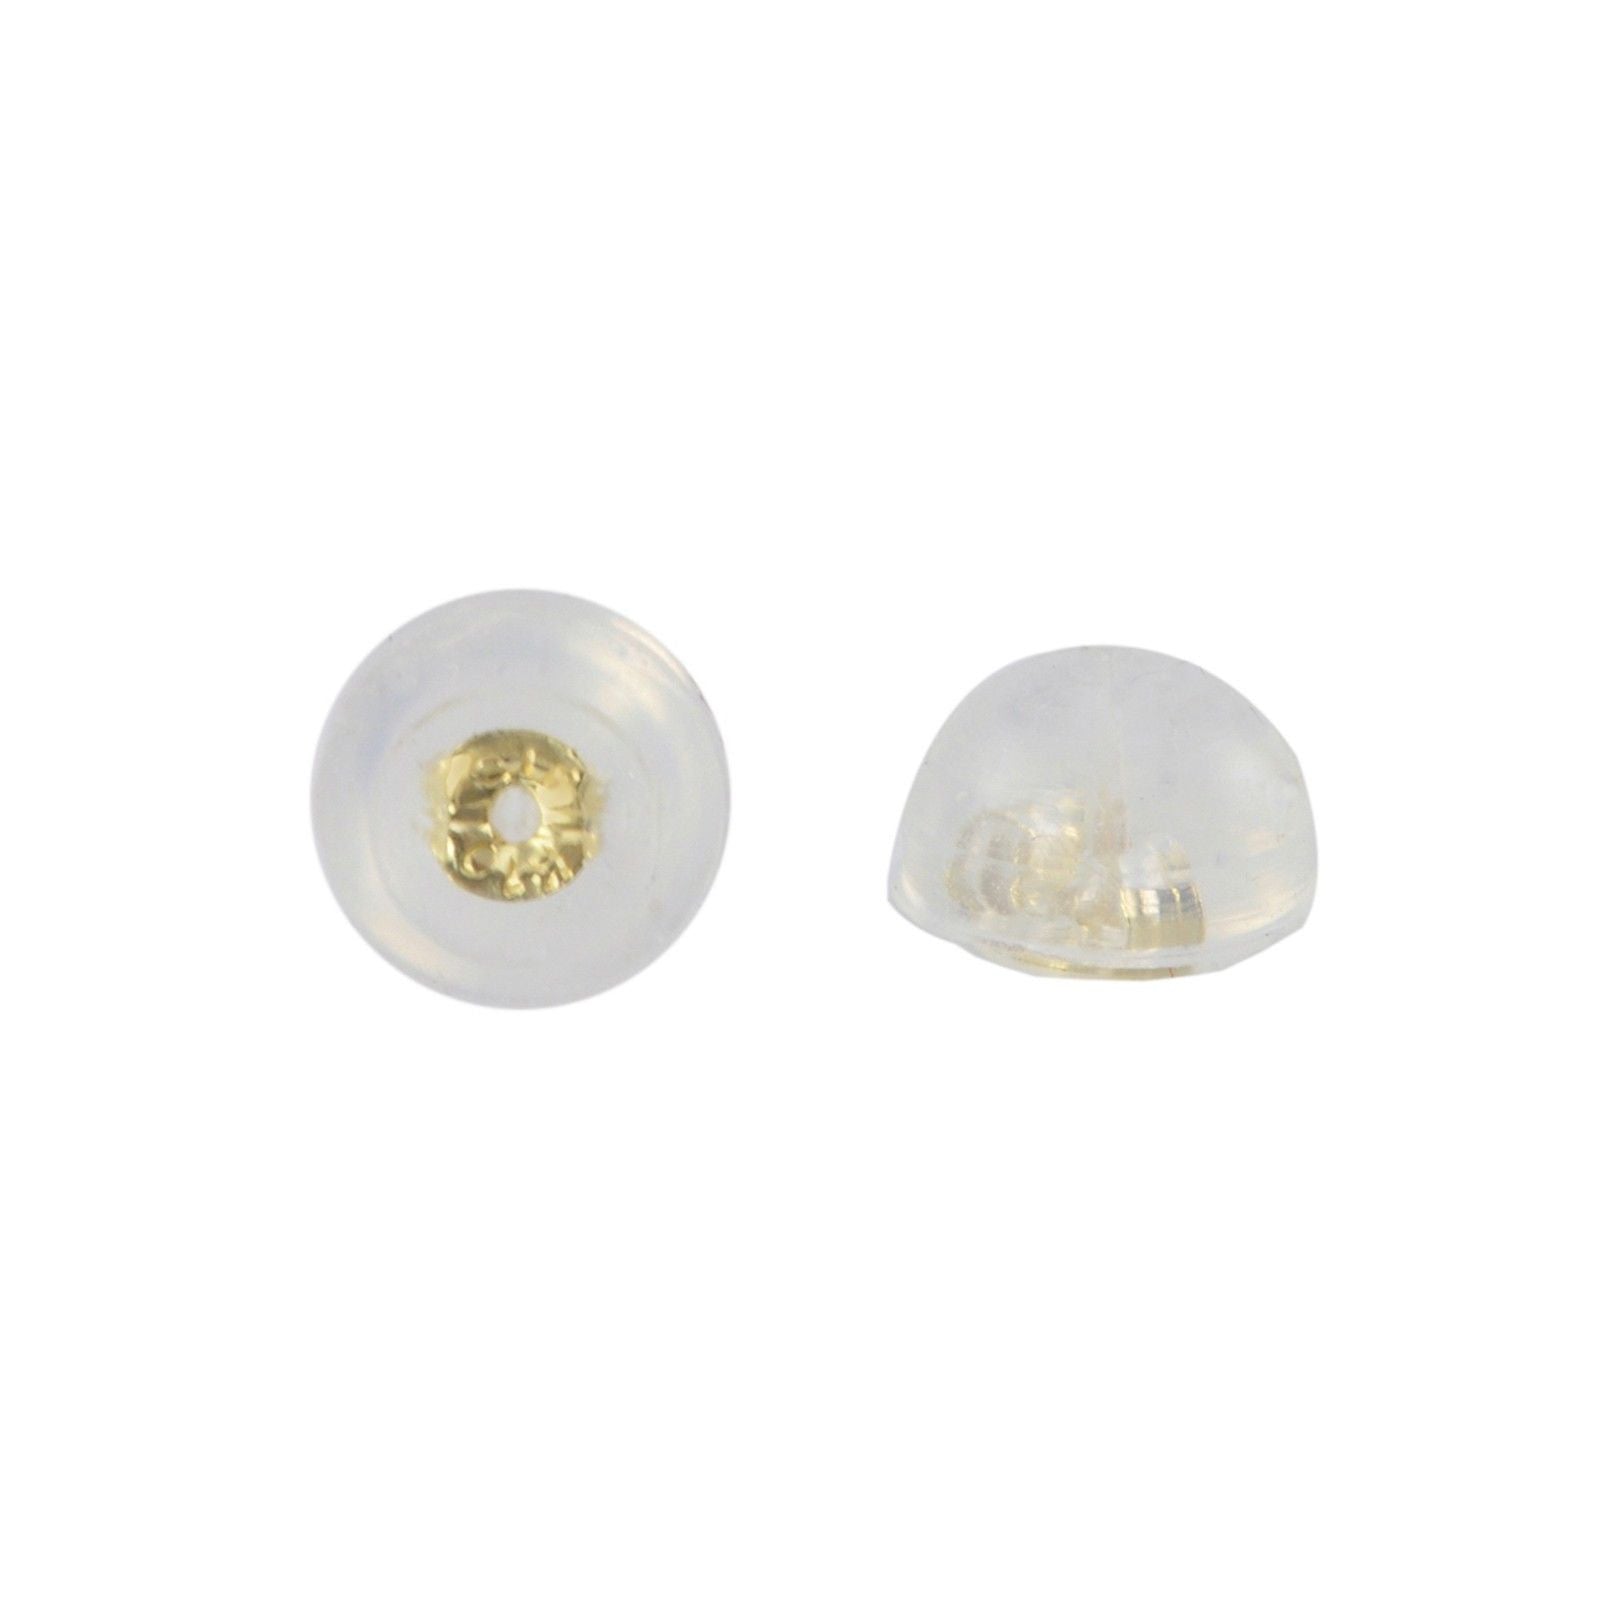 Earring Backs Monster Large Safety 10MM Friction Push backs Nuts in 14K  White Yellow Gold or Silver